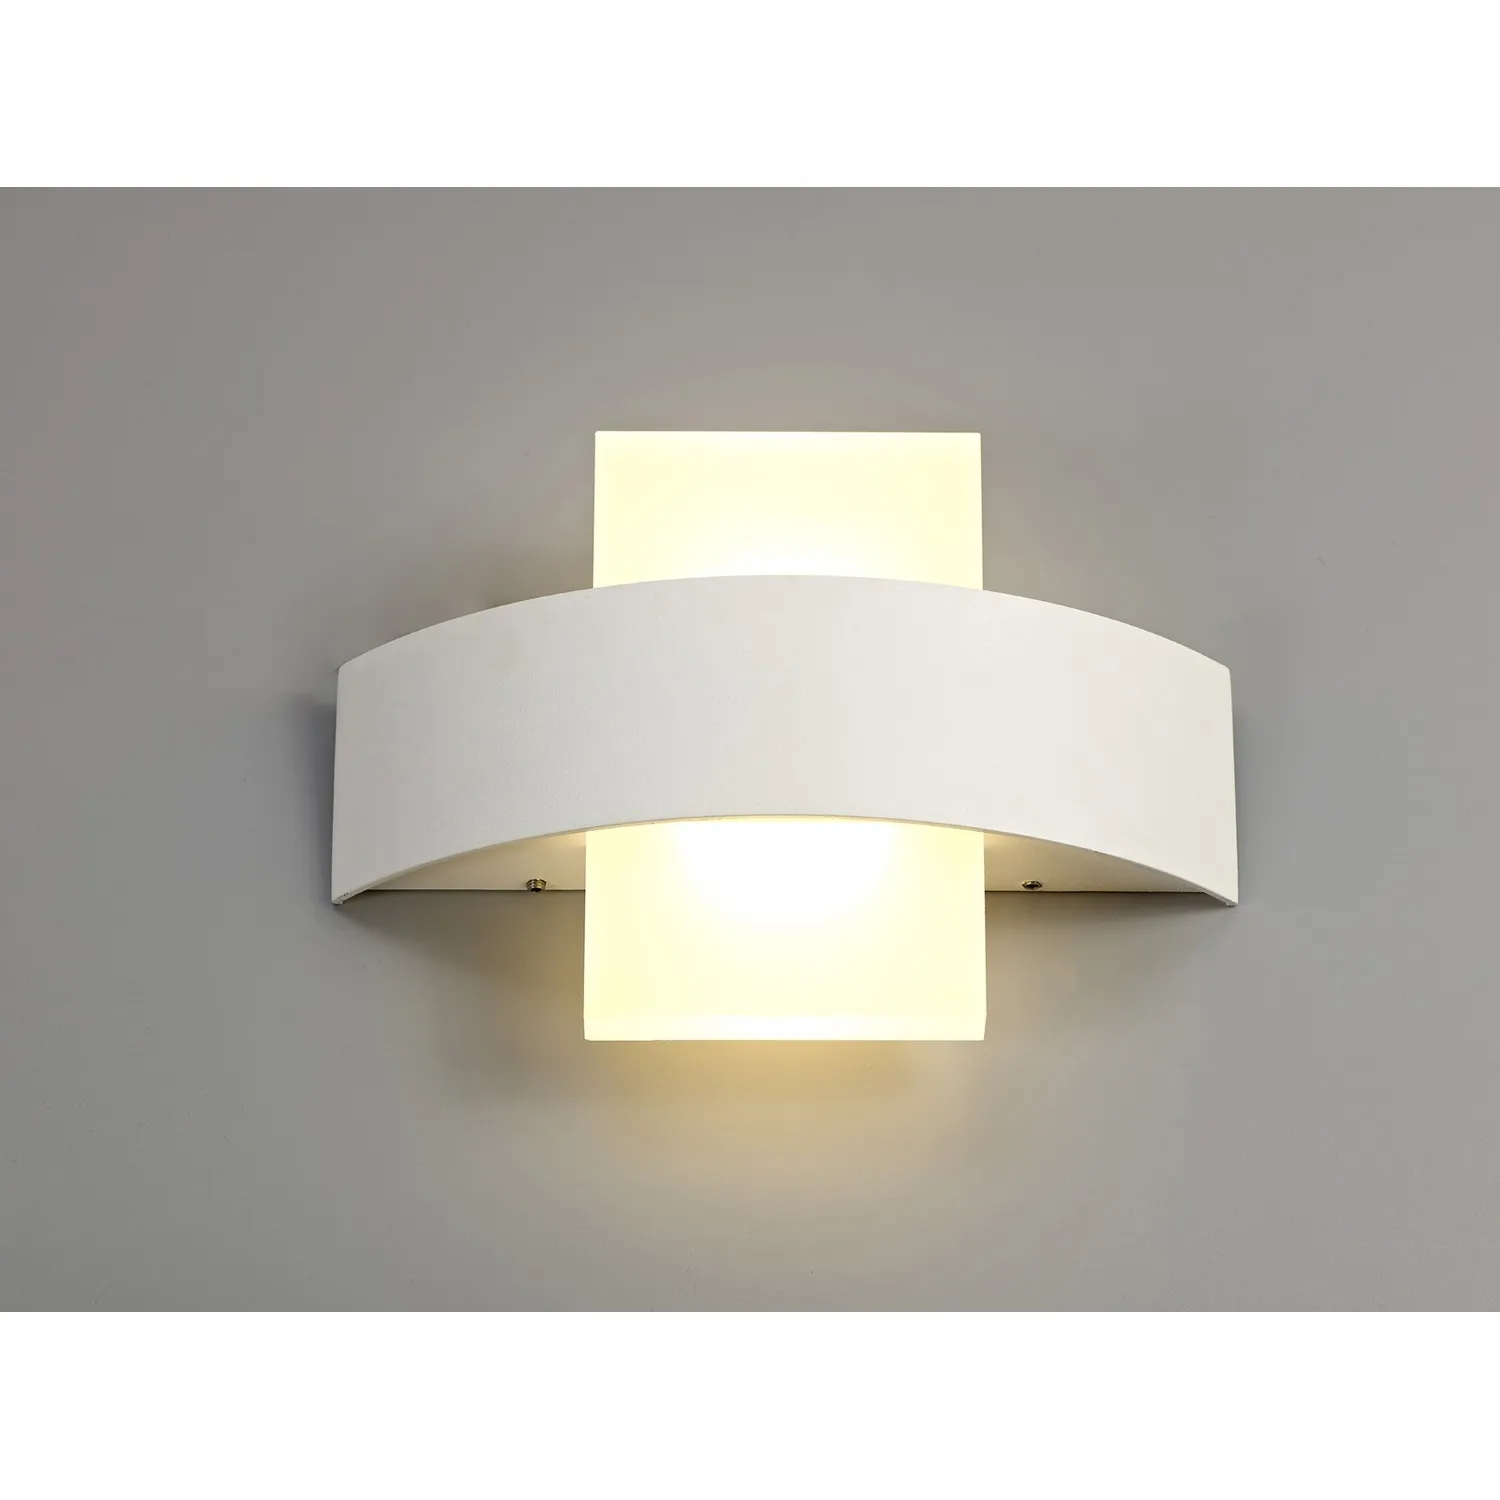 Newbury Up And Downward Lighting Wall Lamp, 2 x 5W LED, 3000K, 850lm, IP54, Sand White, 3yrs Warranty